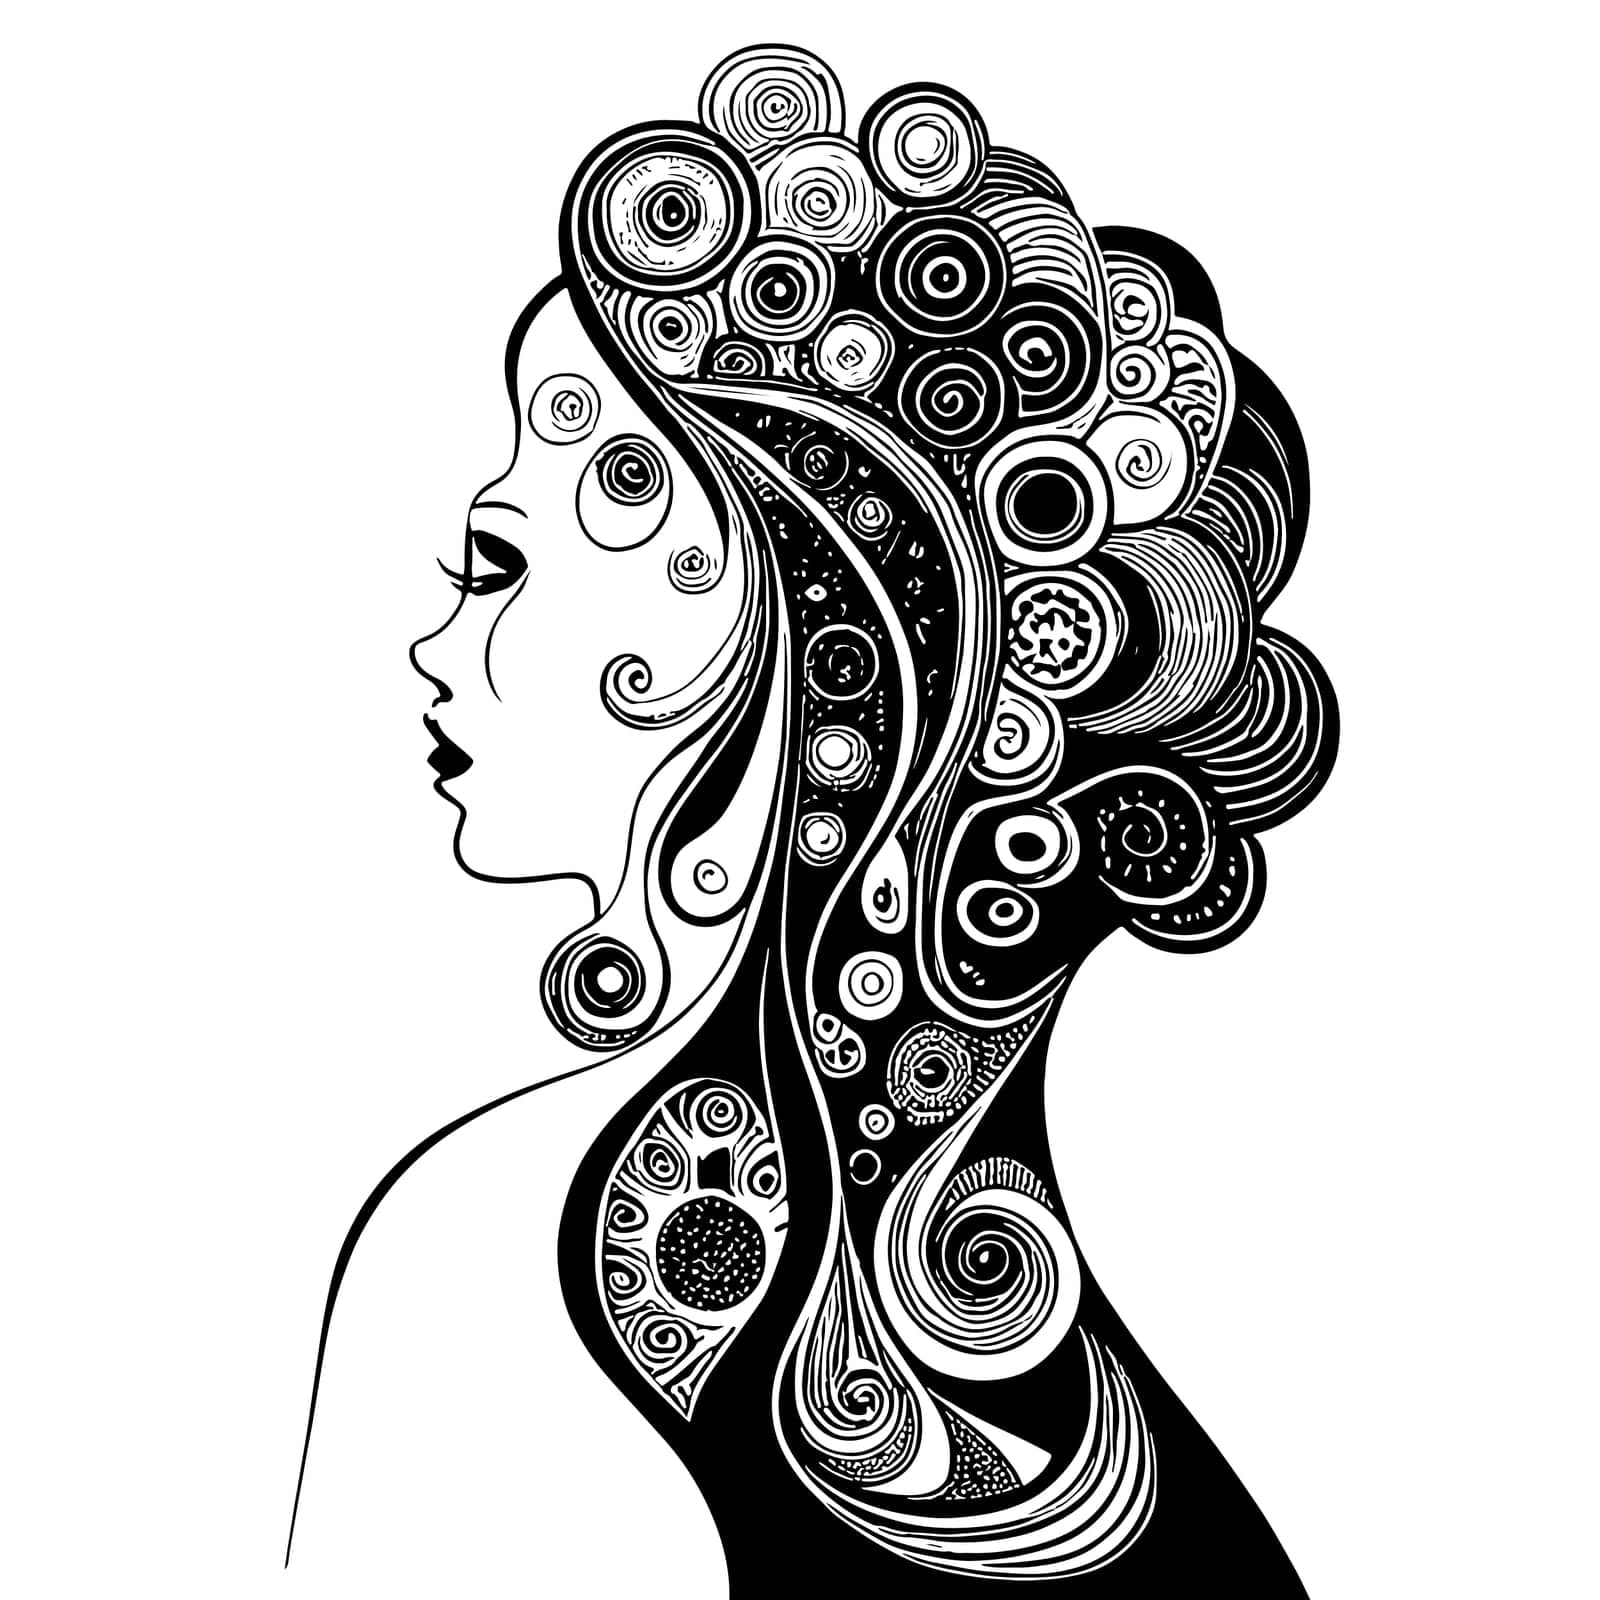 Sketch of beautiful woman silhouette with art hairstyle black and white design